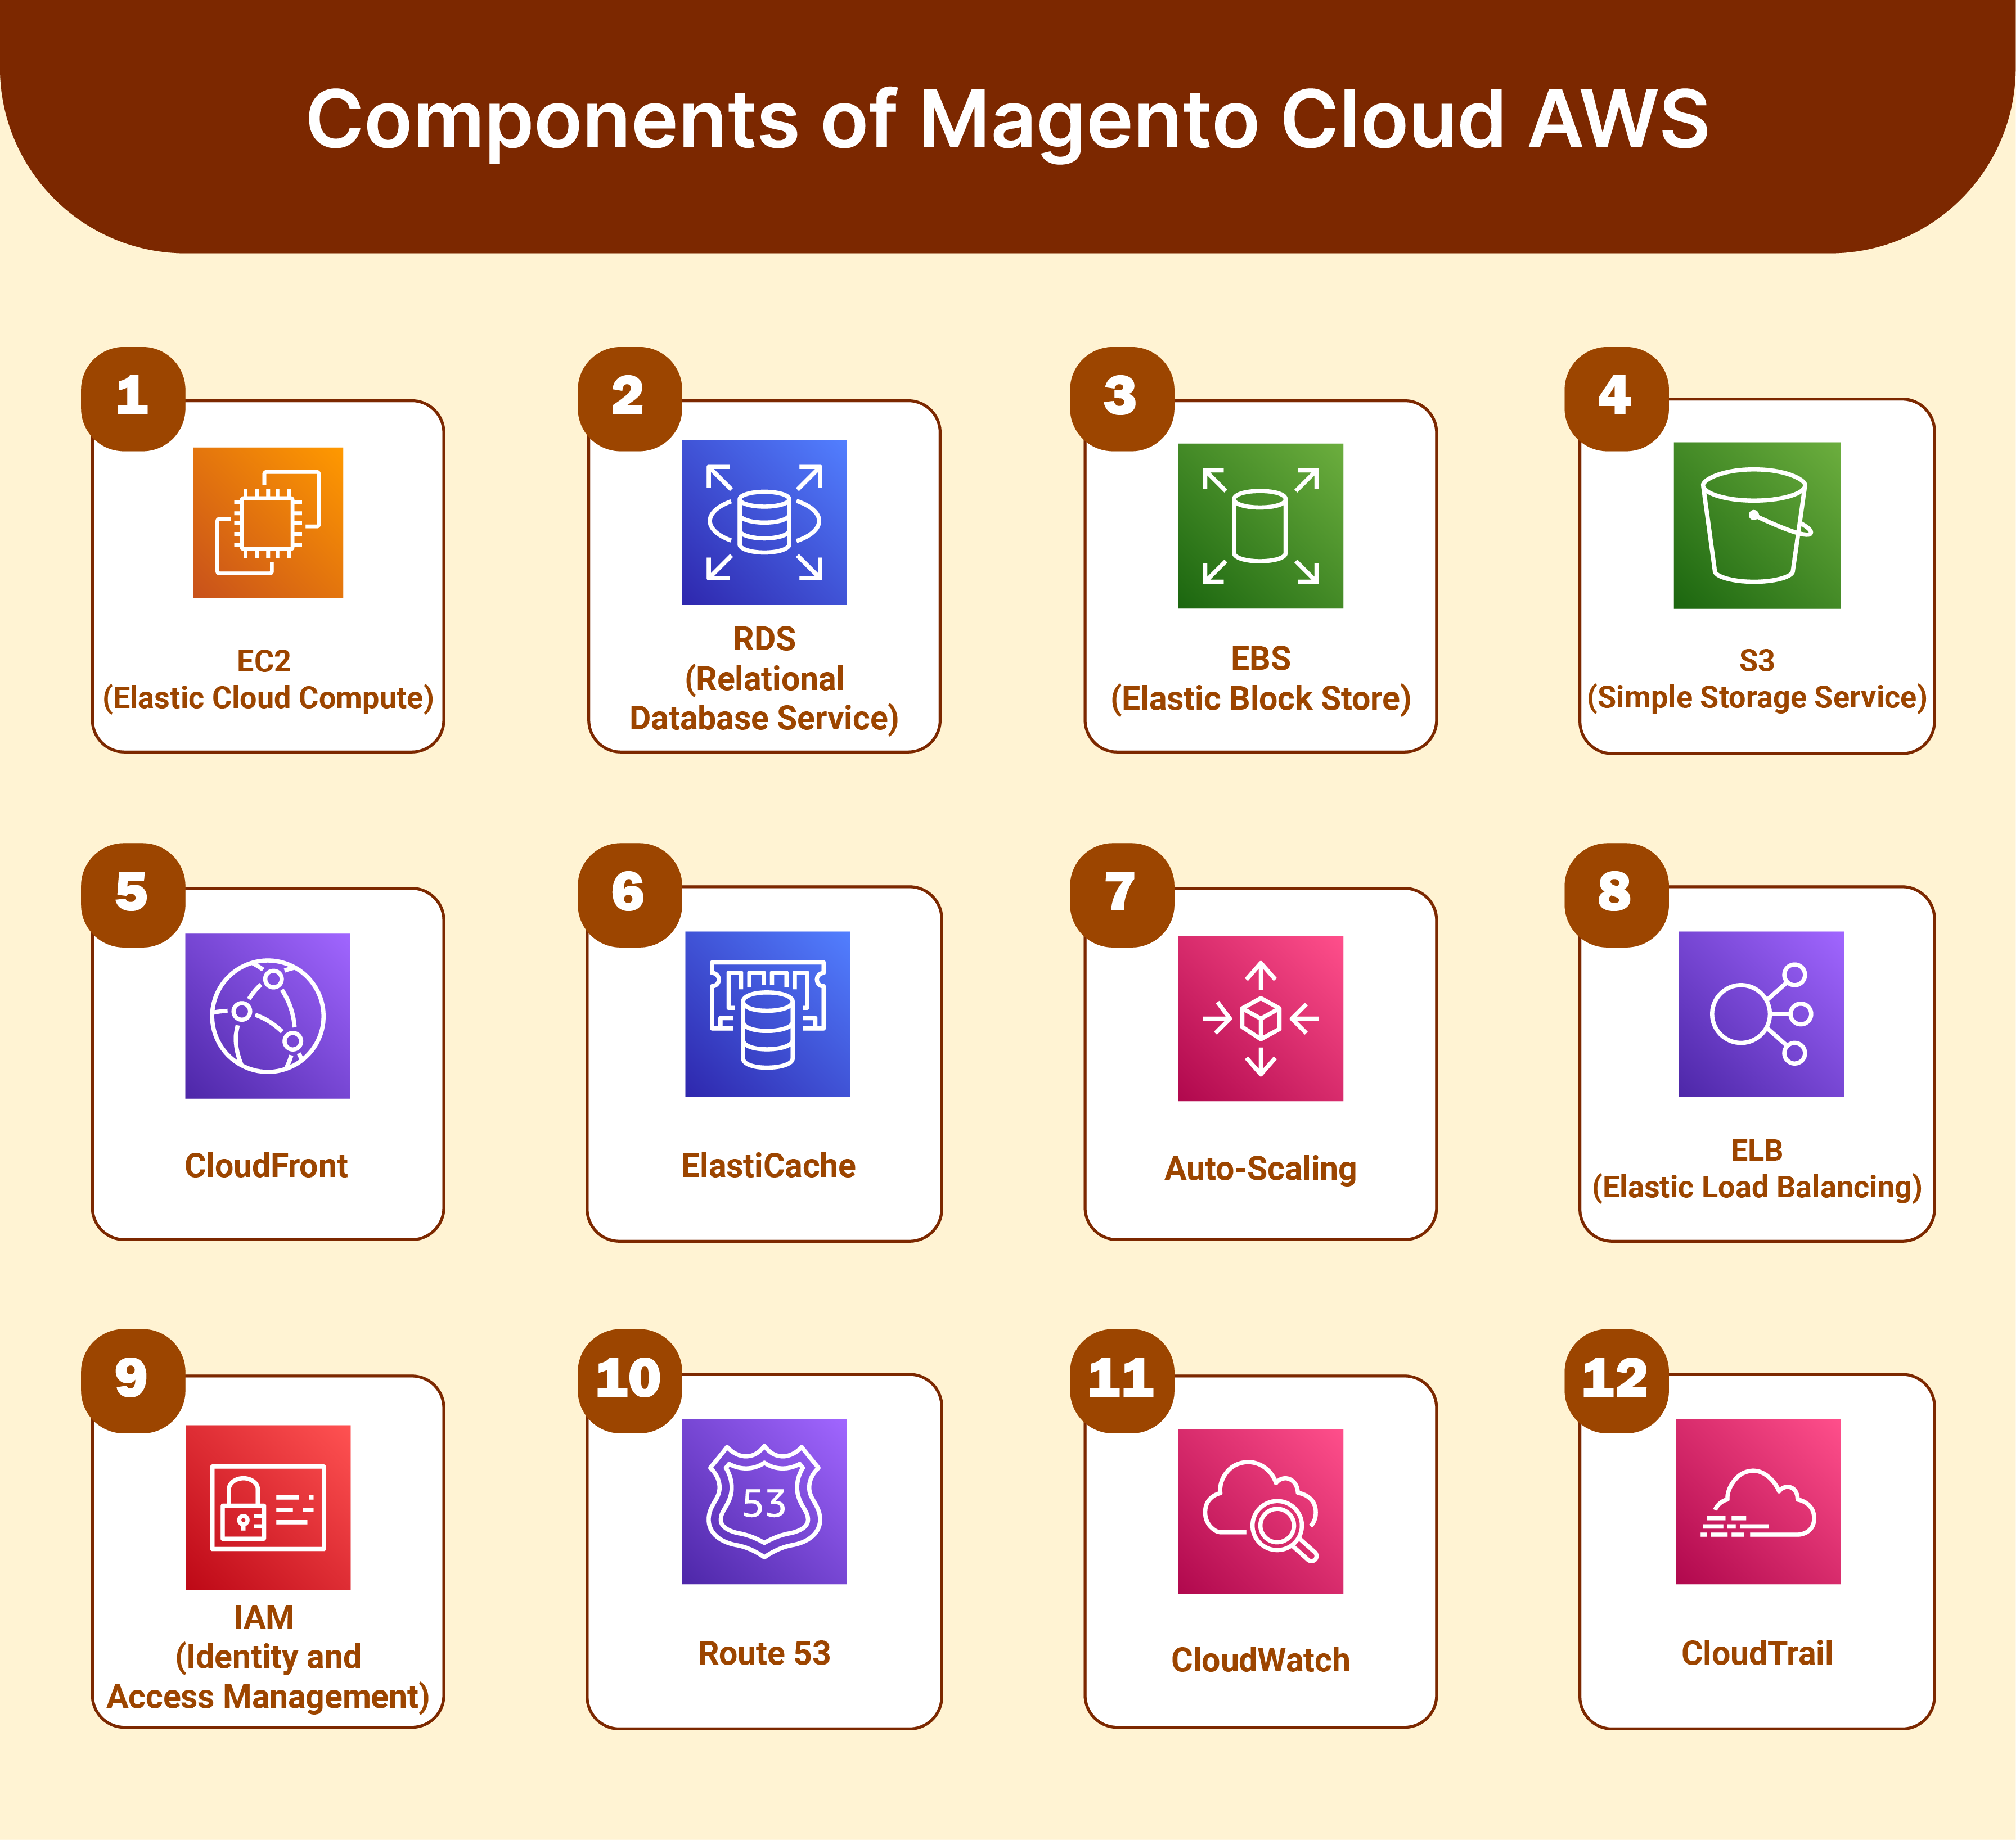 Components of Magento Cloud AWS